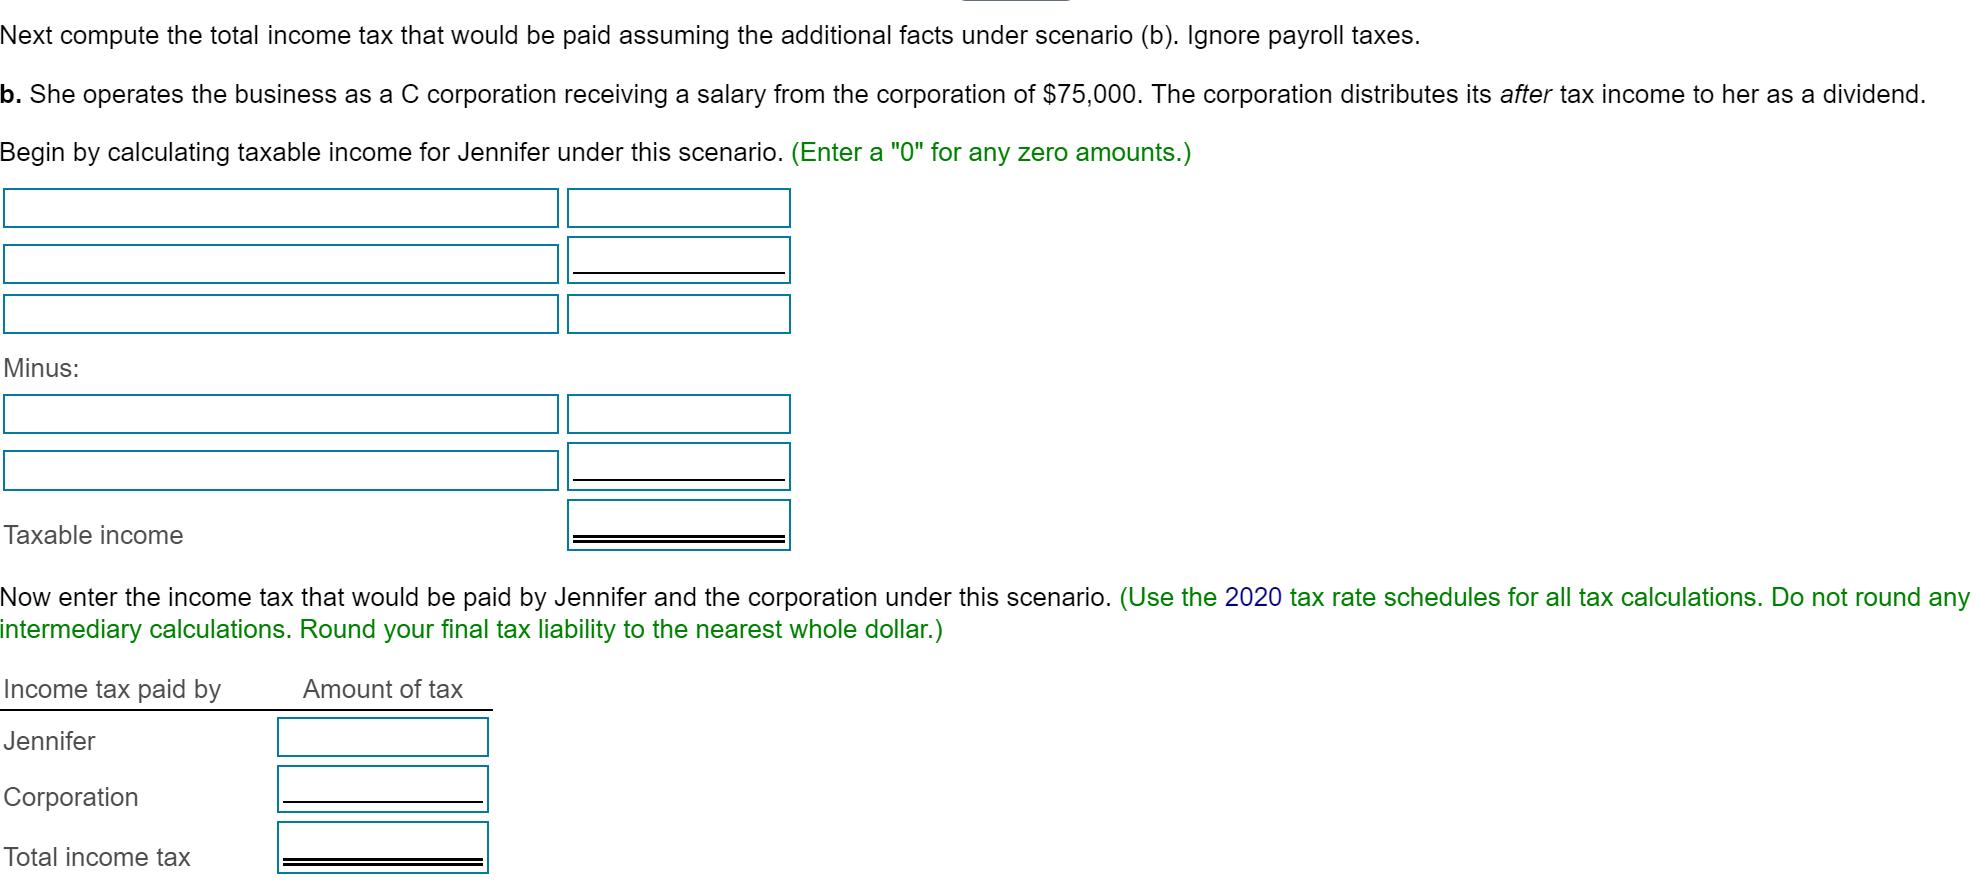 Next compute the total income tax that would be paid assuming the additional facts under scenario (b). Ignore payroll taxes.